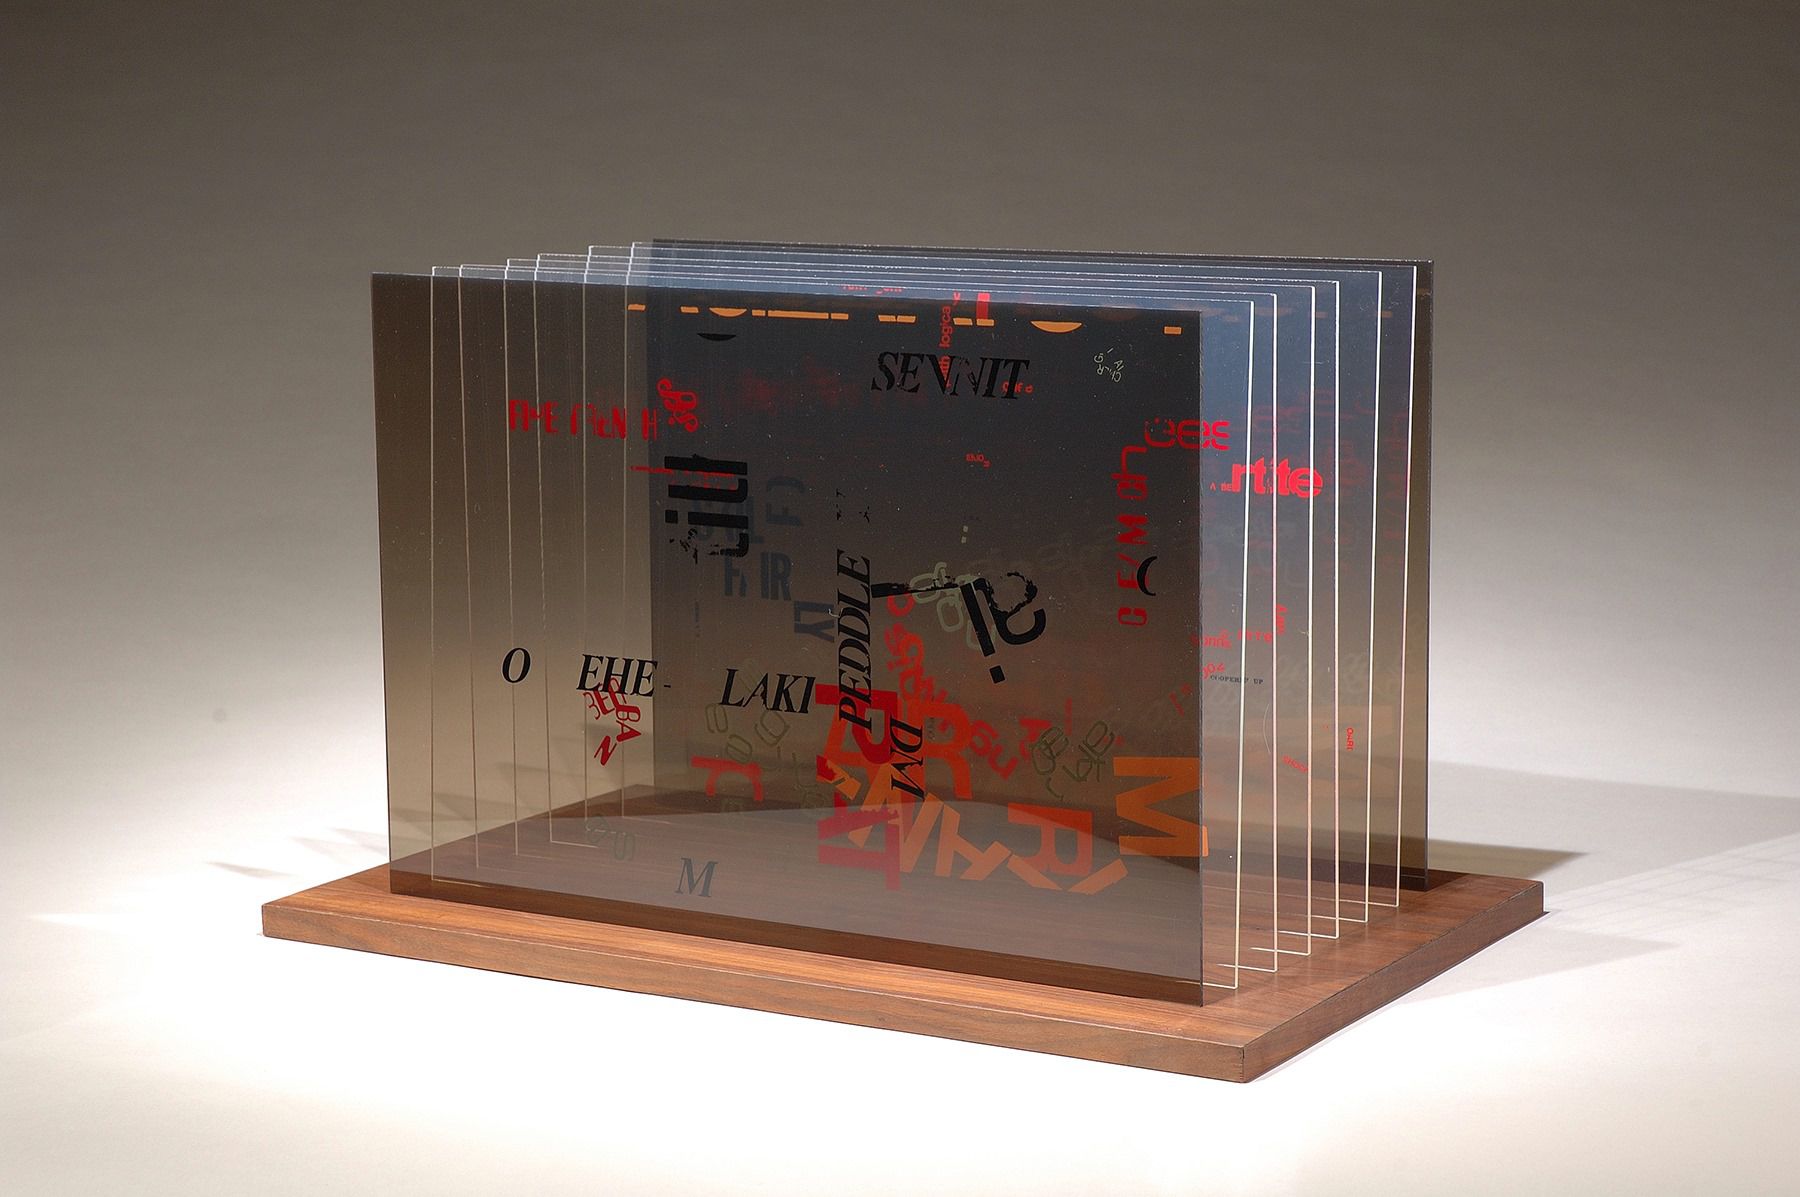 John Cage (American, 1912-1992), Not Wanting To Say Anything About Marcel Plexigram II, 1969; silkscreened Plexiglas mounted in walnut base, 14 1/2″ x 14 1/2″ x 14 1/2″, Purchased with funds from the Cherry Hill Endowment. 2006.005.001a‑i, .002 